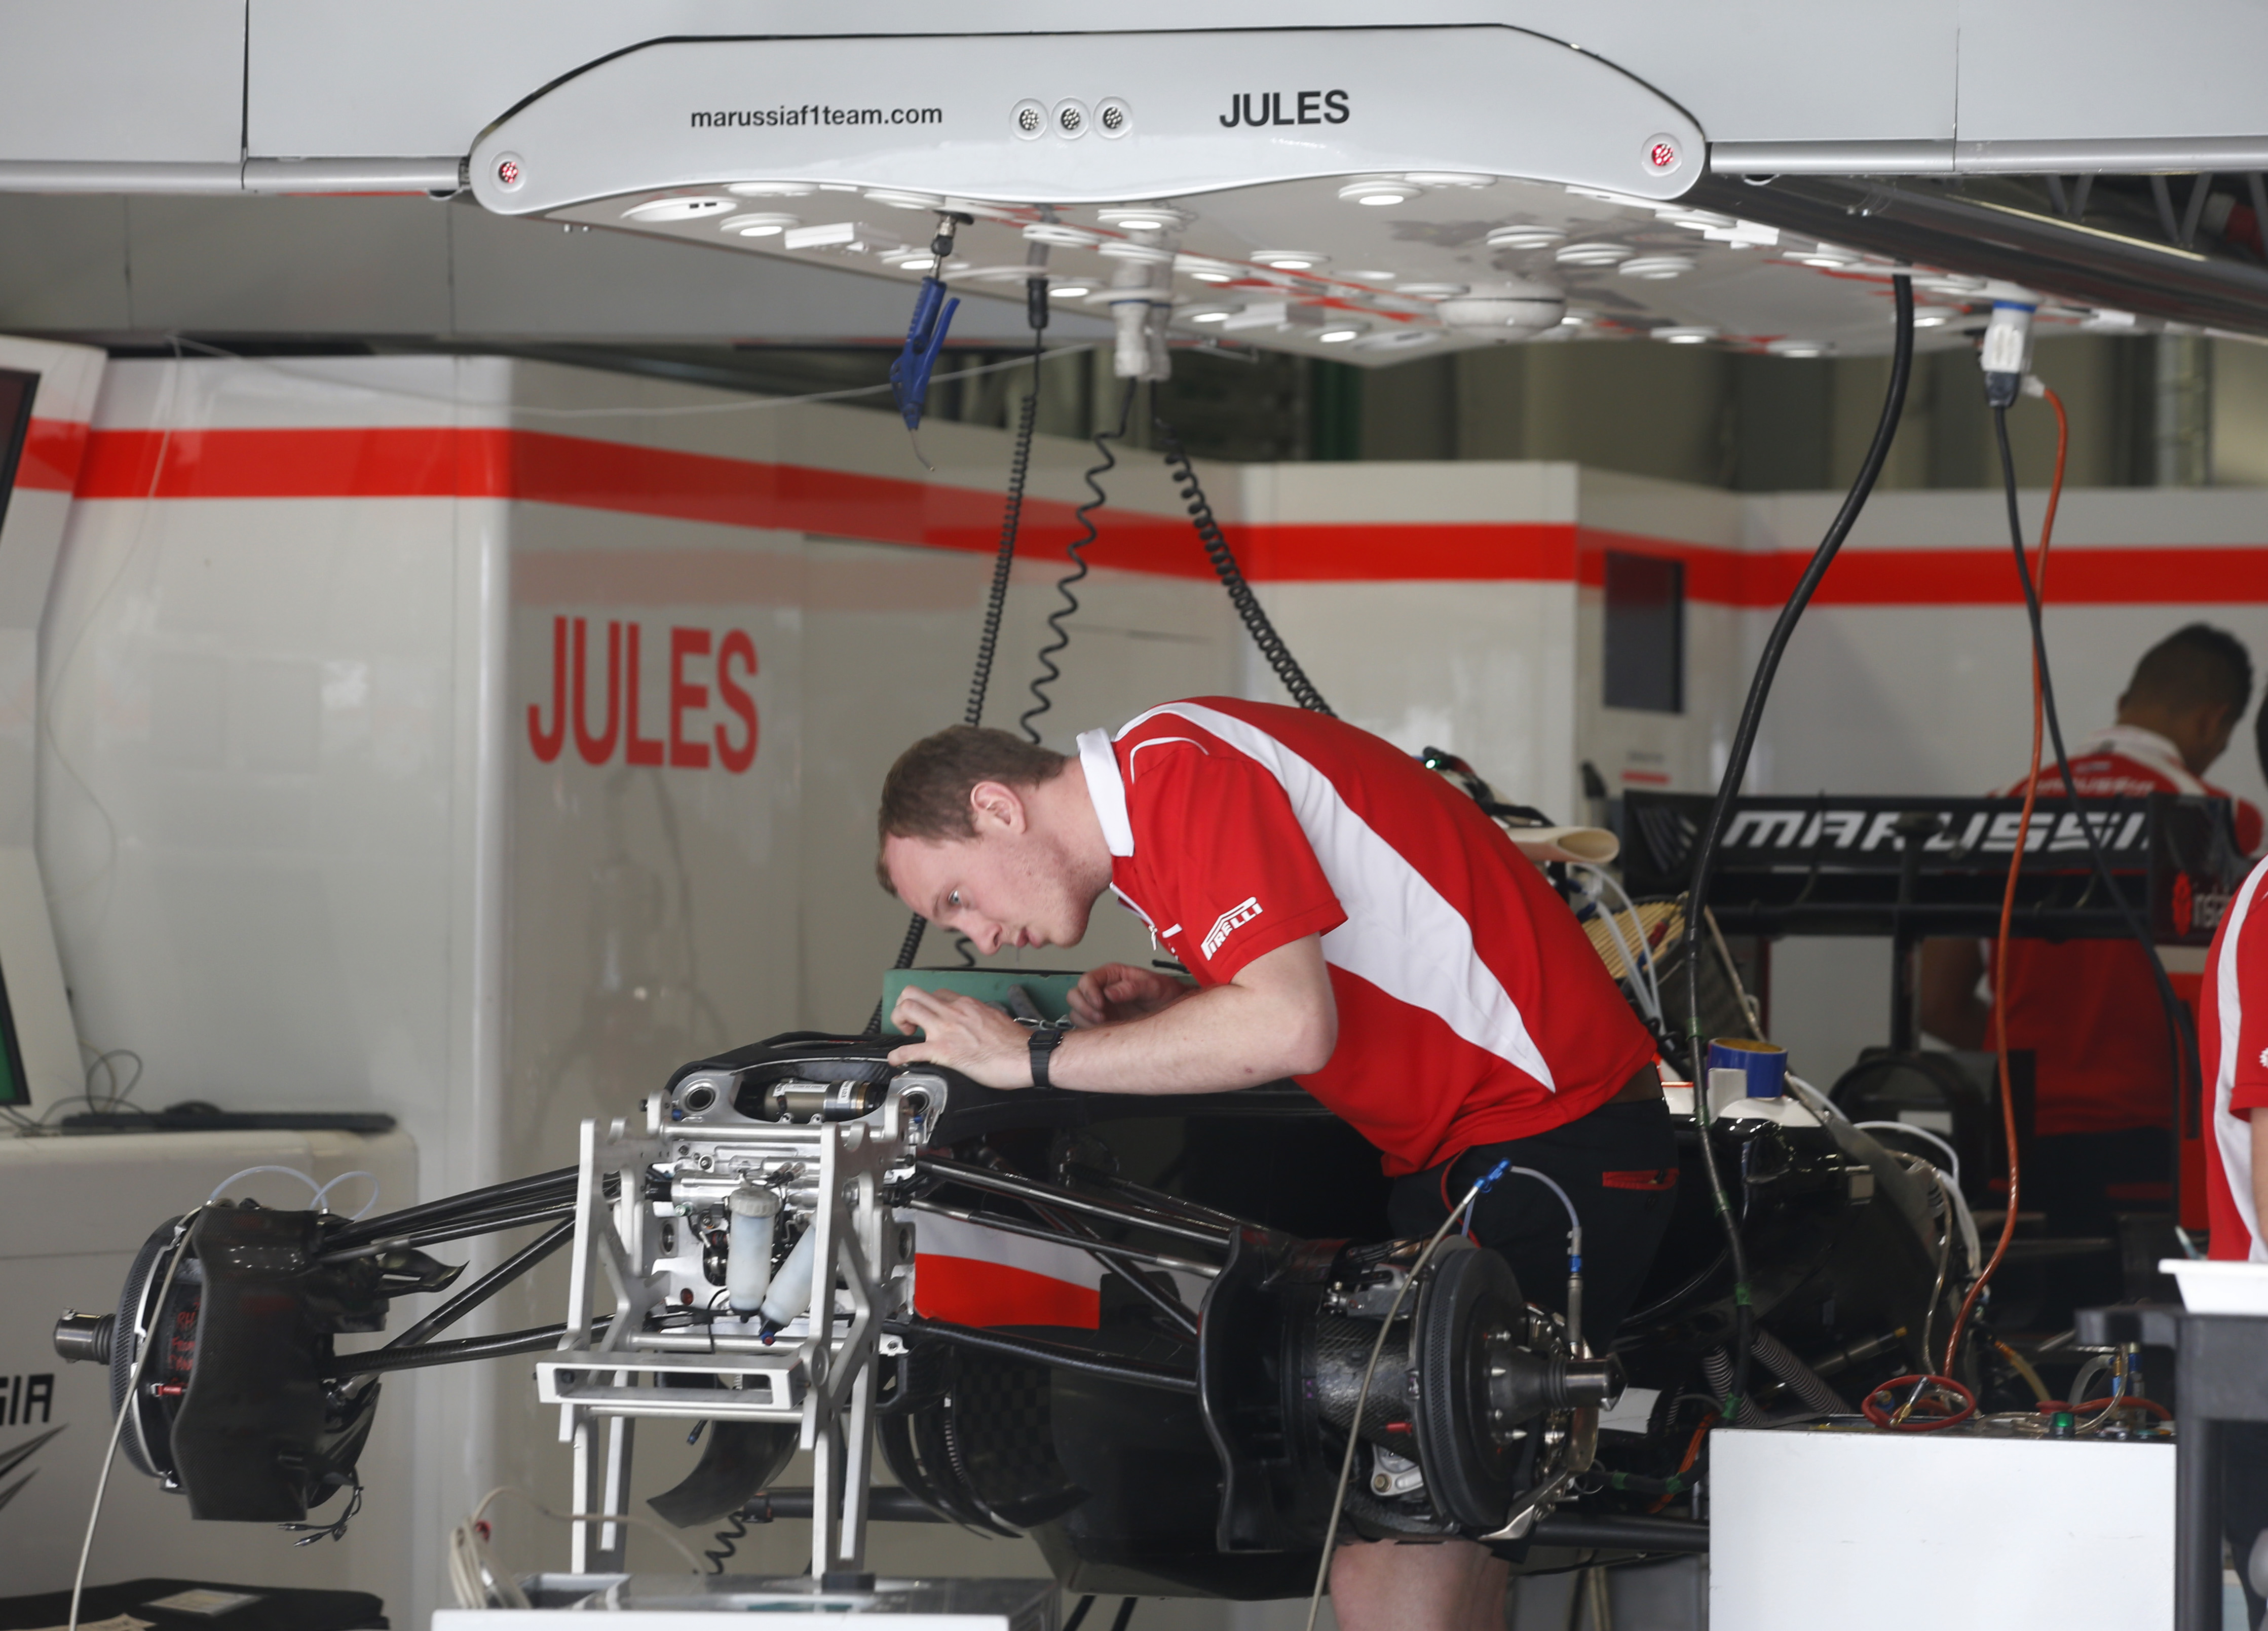 A Marussia mechanic works on a car in the Jules Bianchi garage at the Sochi Autodrom Formula One circuit. Photo: AP